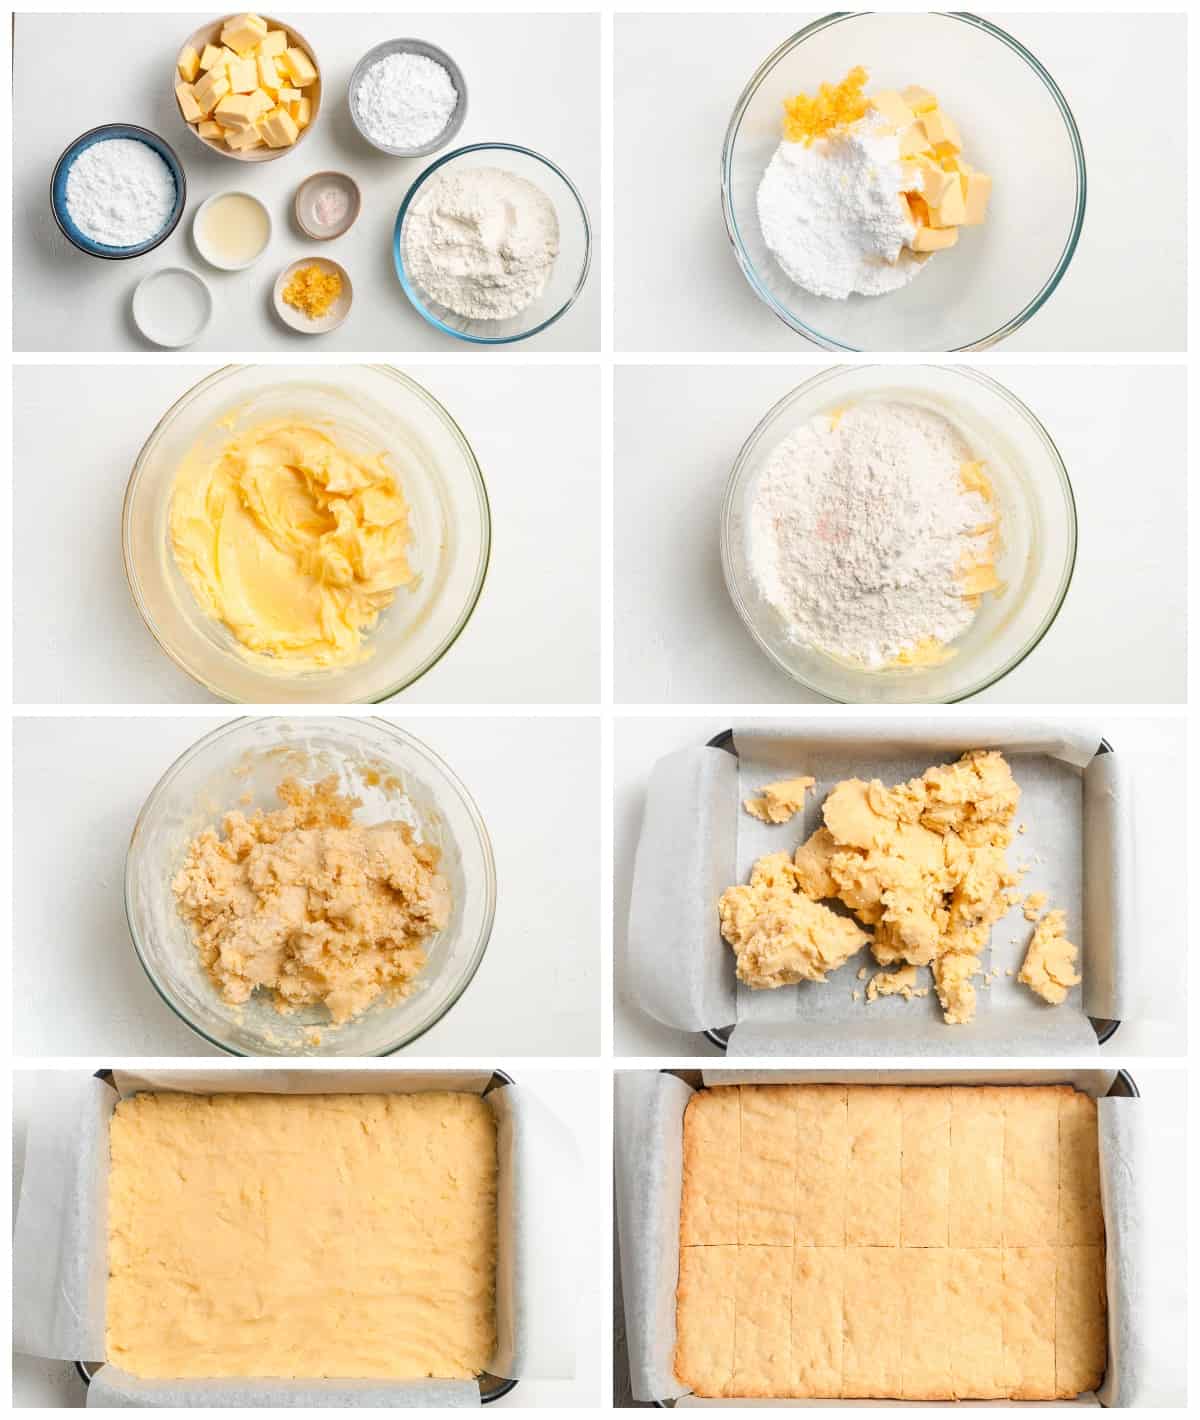 how to make lemon shortbread cookies step by step photo instructions